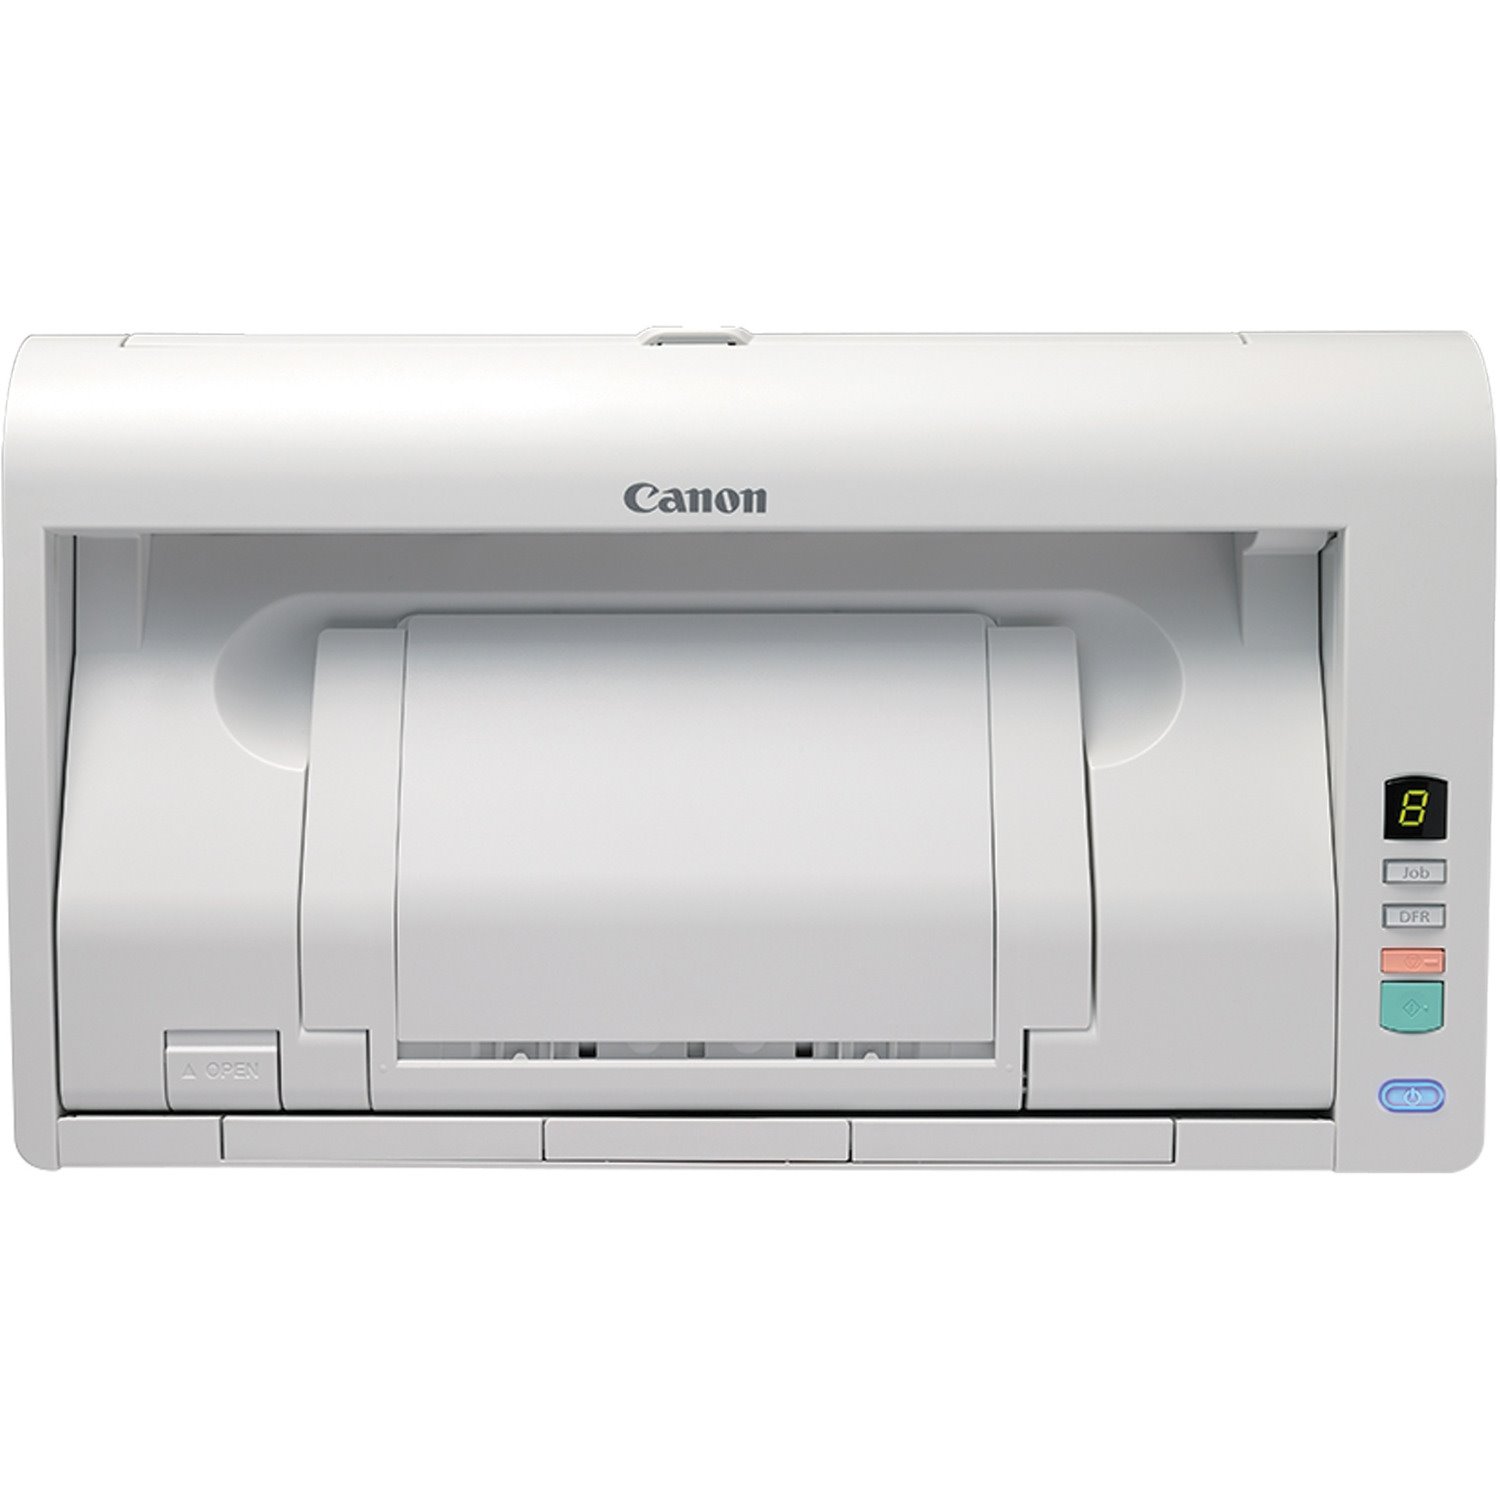 Canon DR-M1060 Sheetfed Scanner - 600 dpi Optical